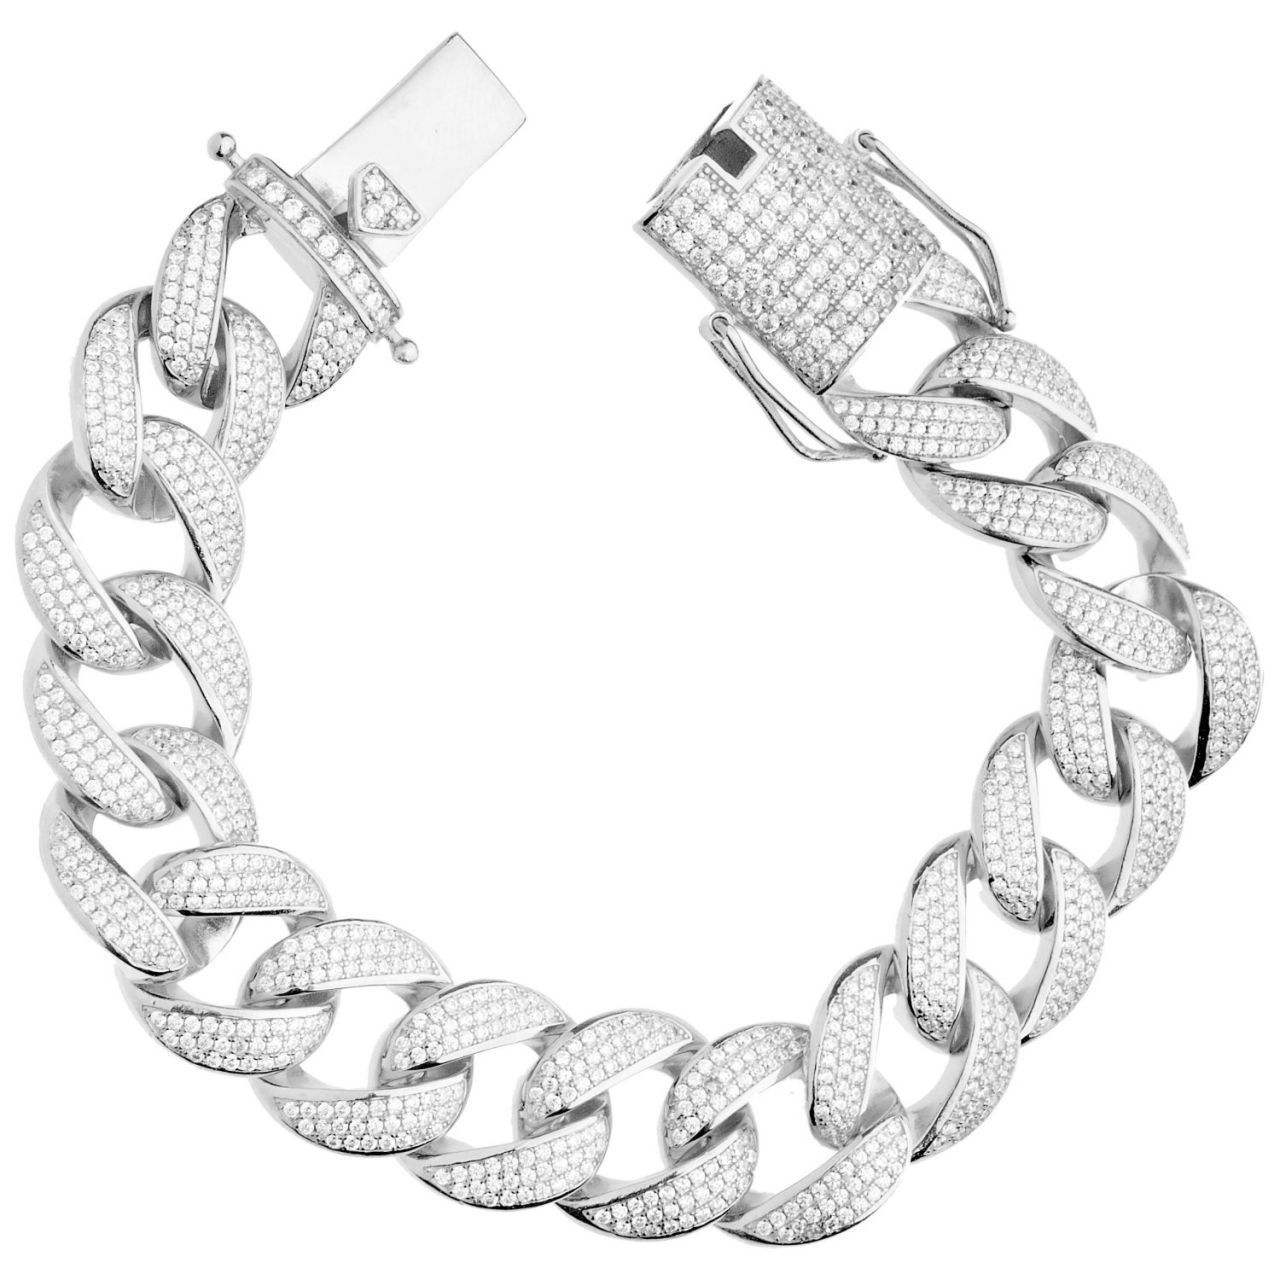 Premium Bling 925 Sterling Silber Armband – MIAMI CURB 18mm